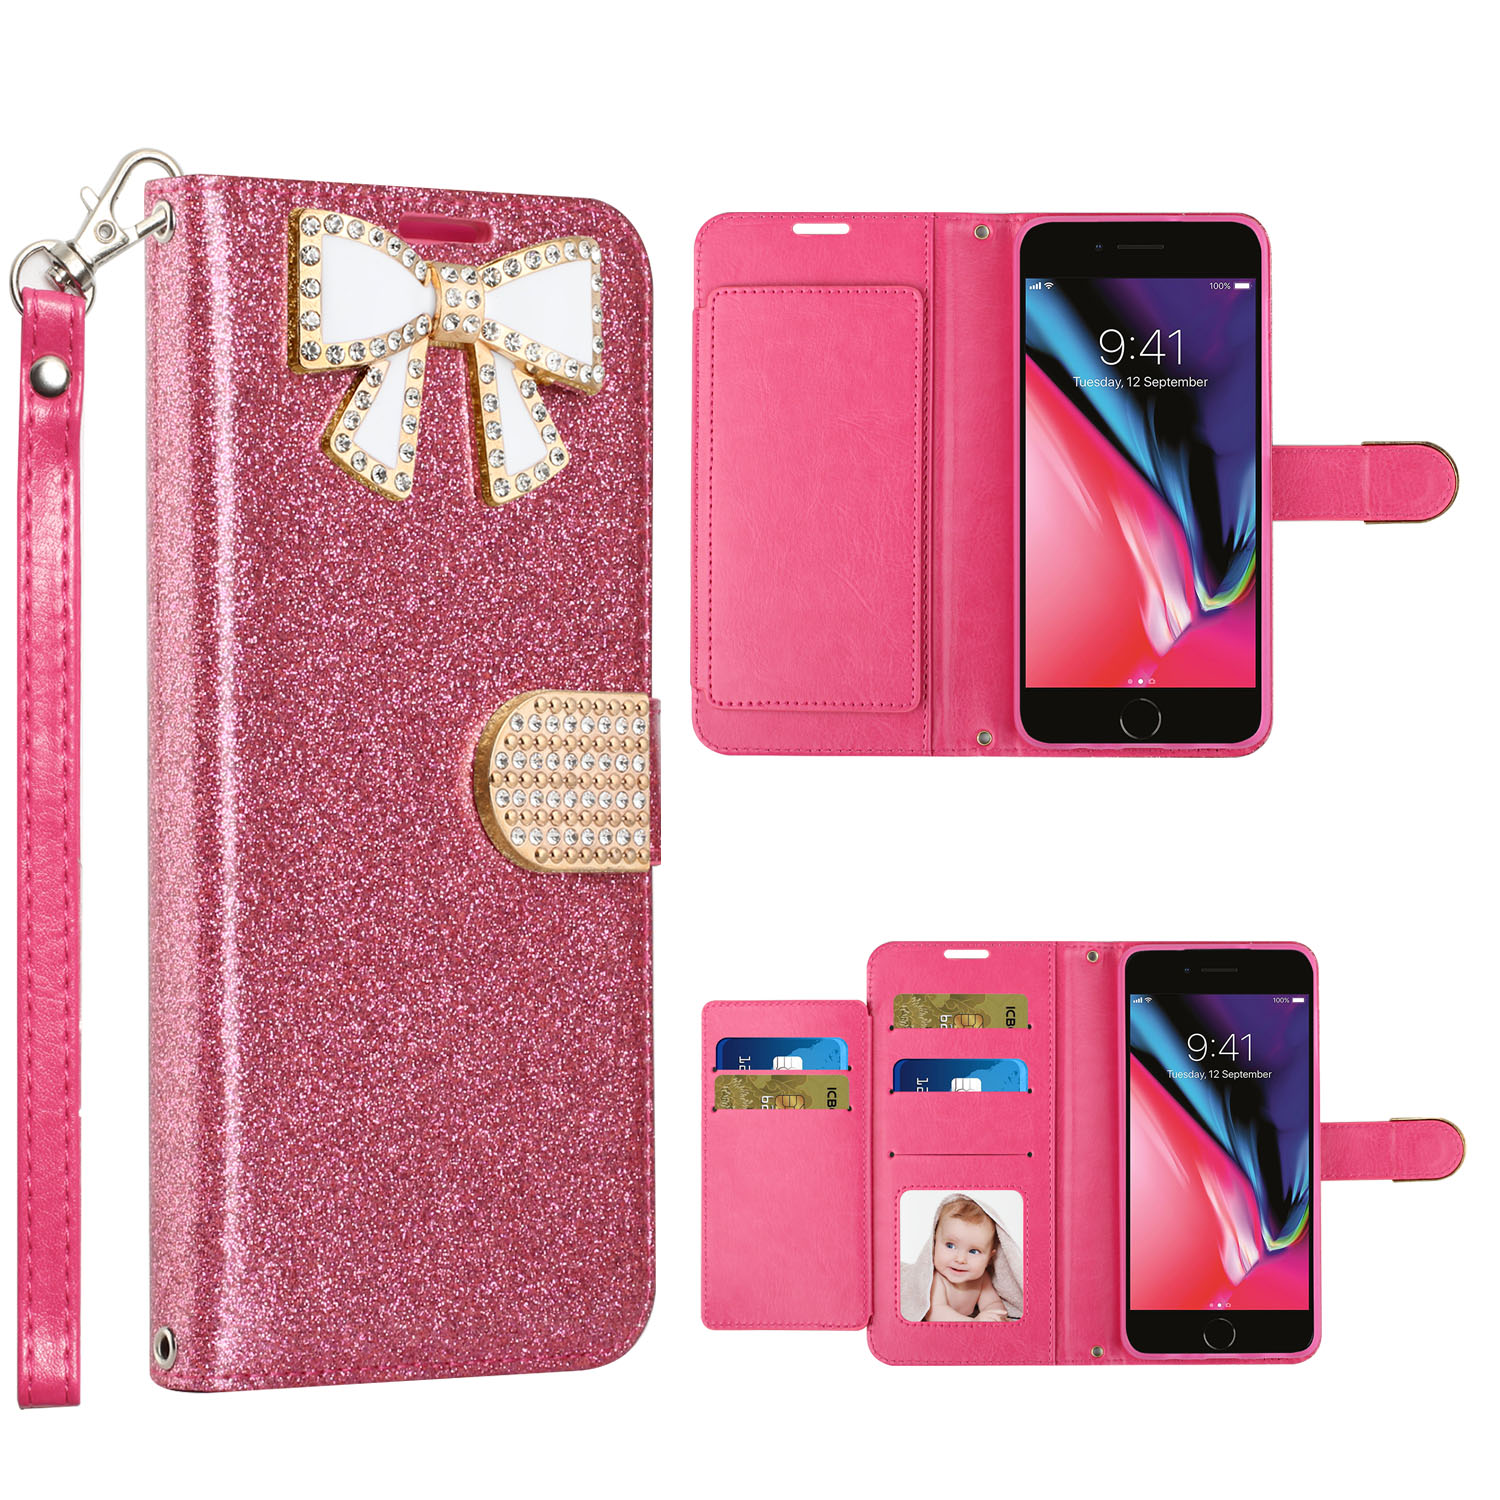 Ribbon Bow Crystal Diamond WALLET Case for Apple iPhone 8 Plus / 7 Plus (Hot Pink)